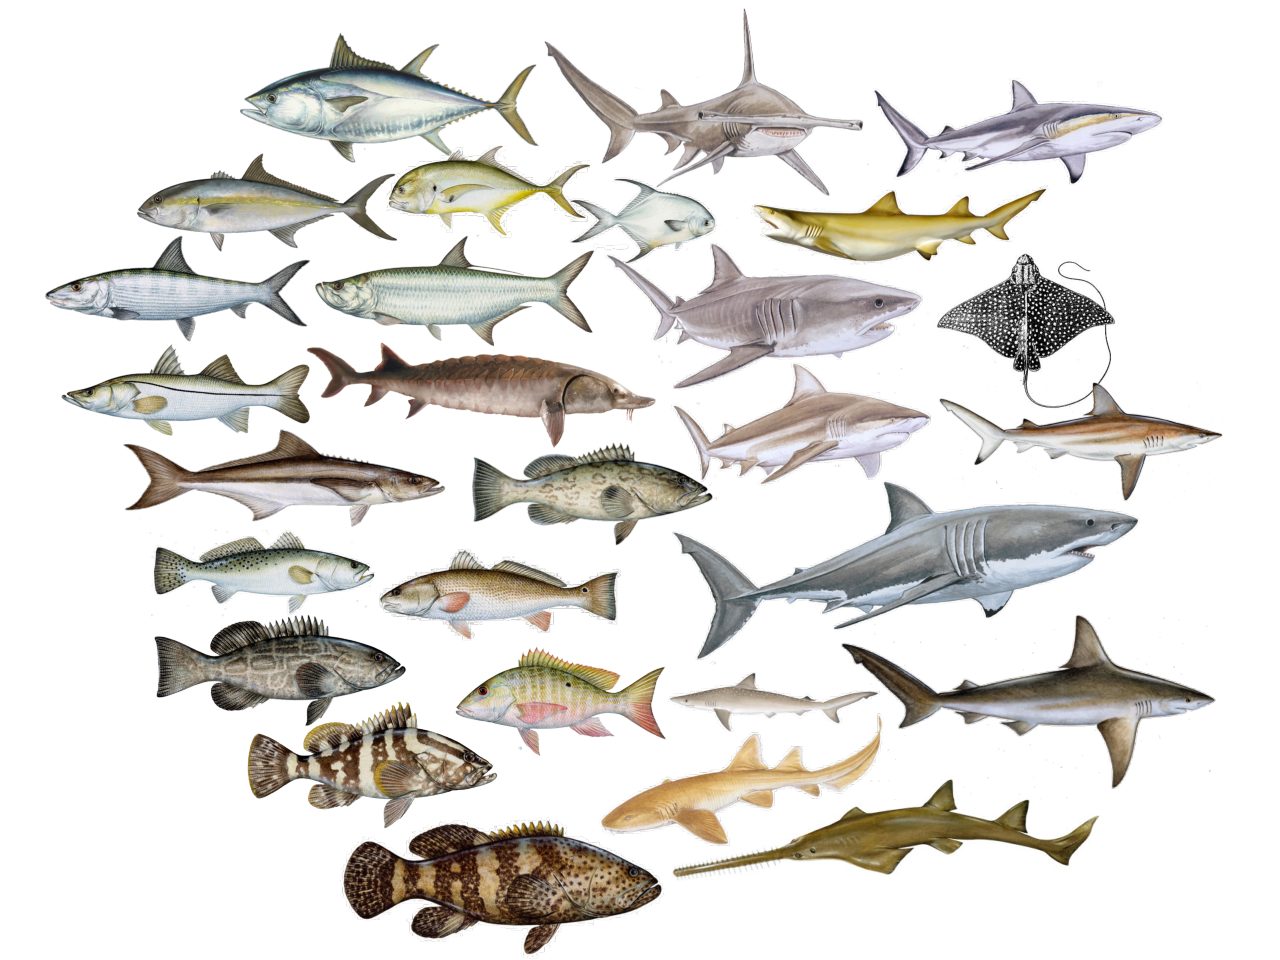 Picture collage of the species for which detection data have been shared through iTAG